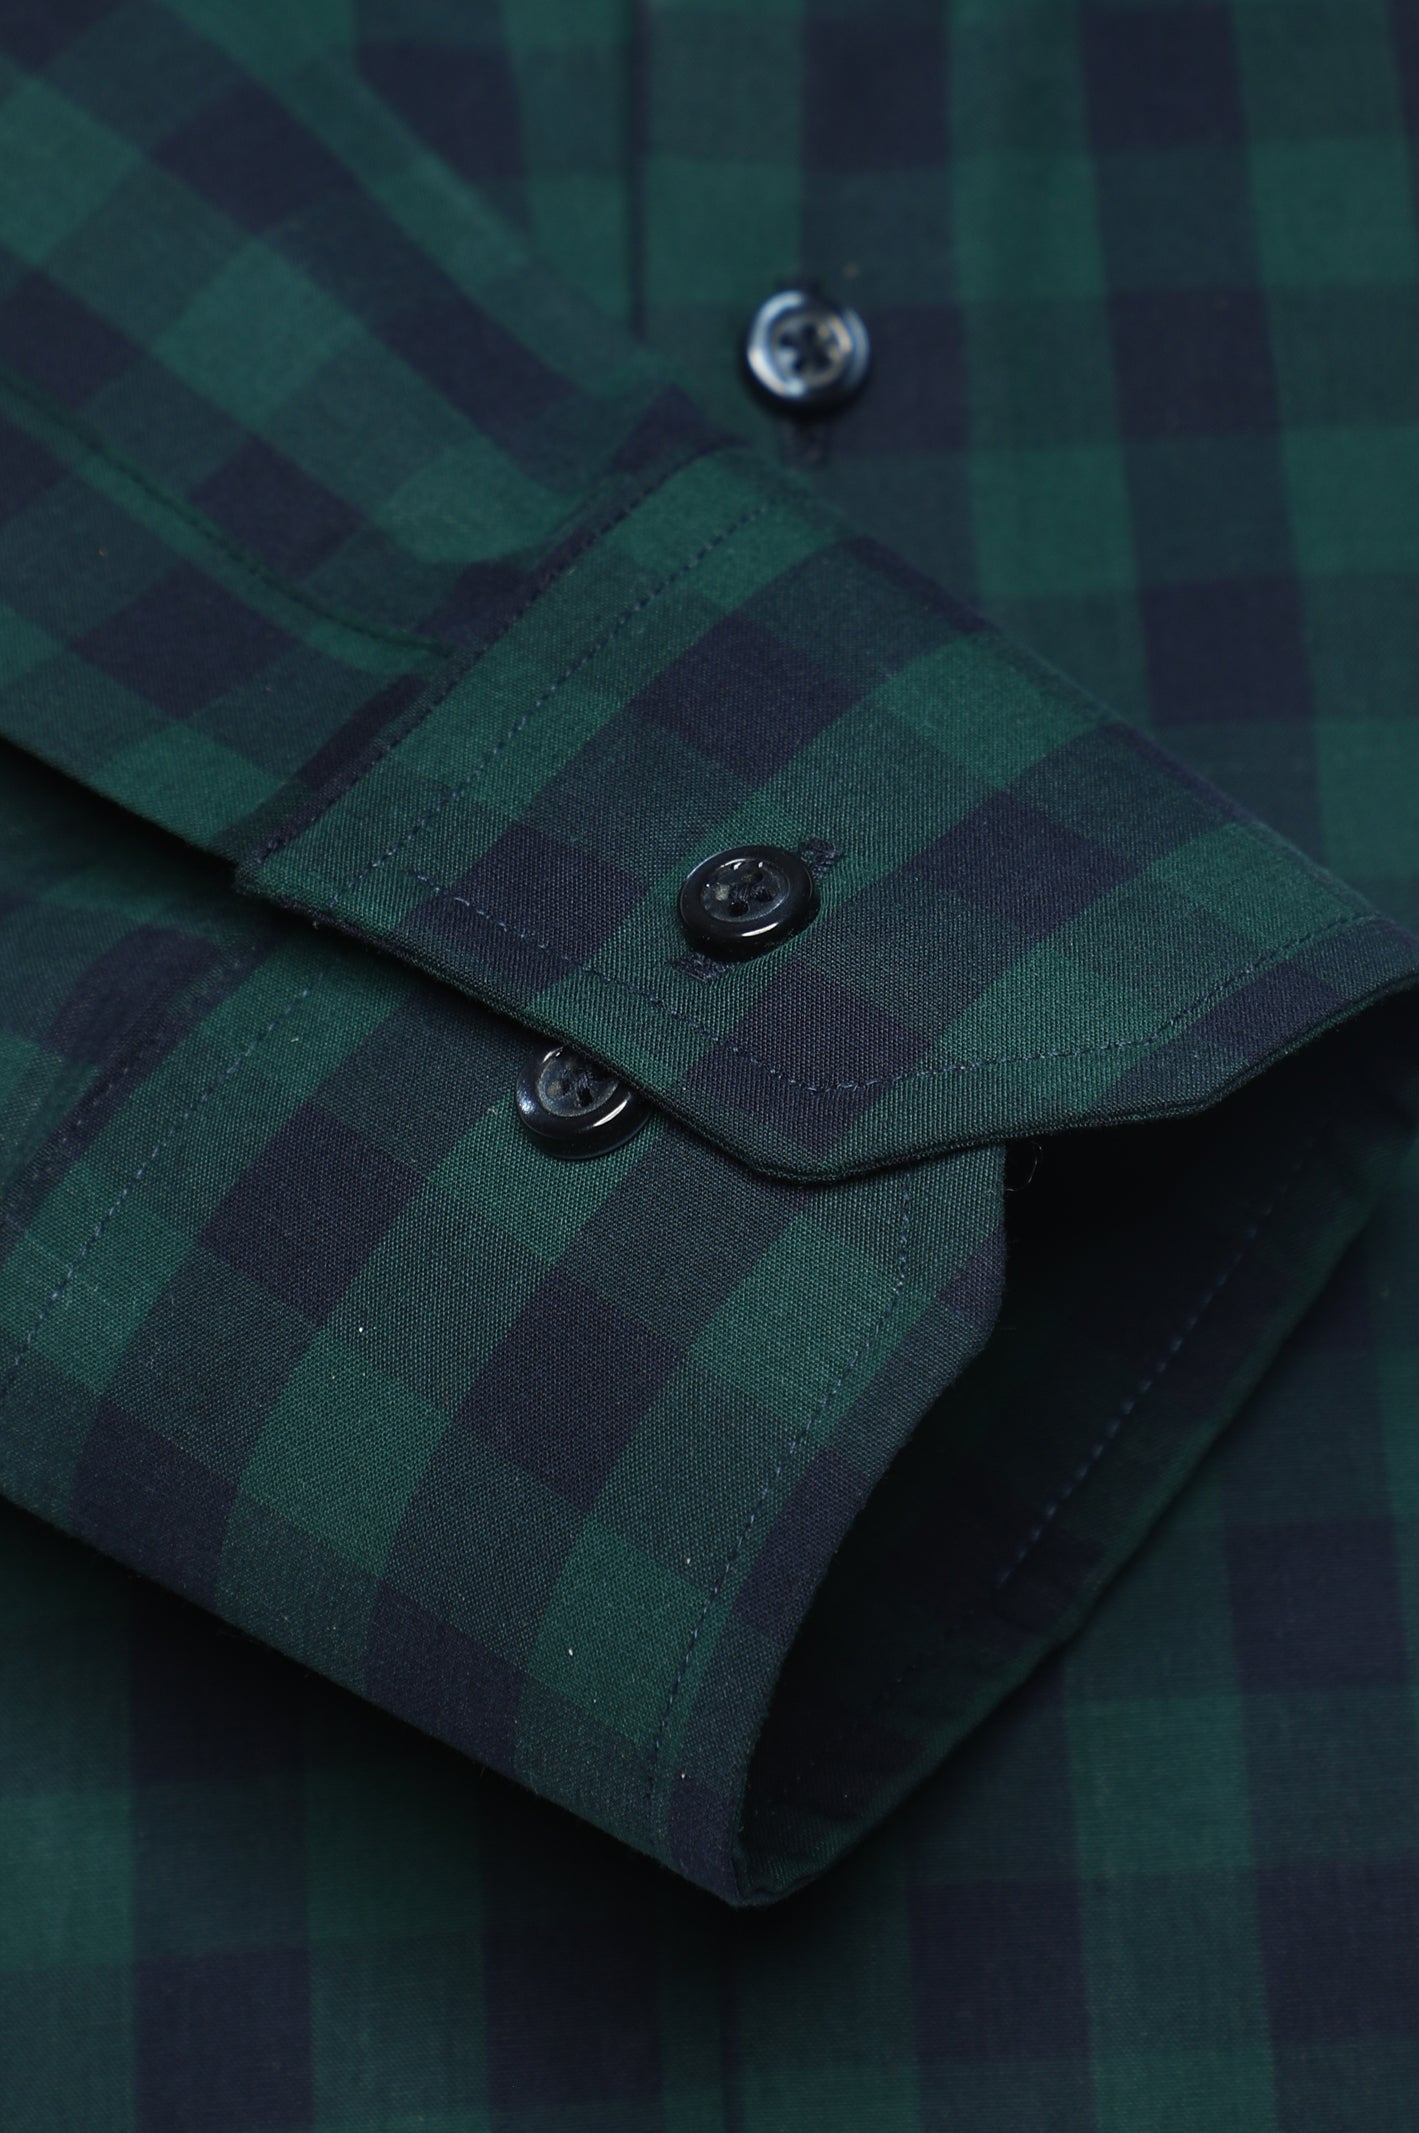 Green Gingham Check Casual Milano Shirt for Men - Diners